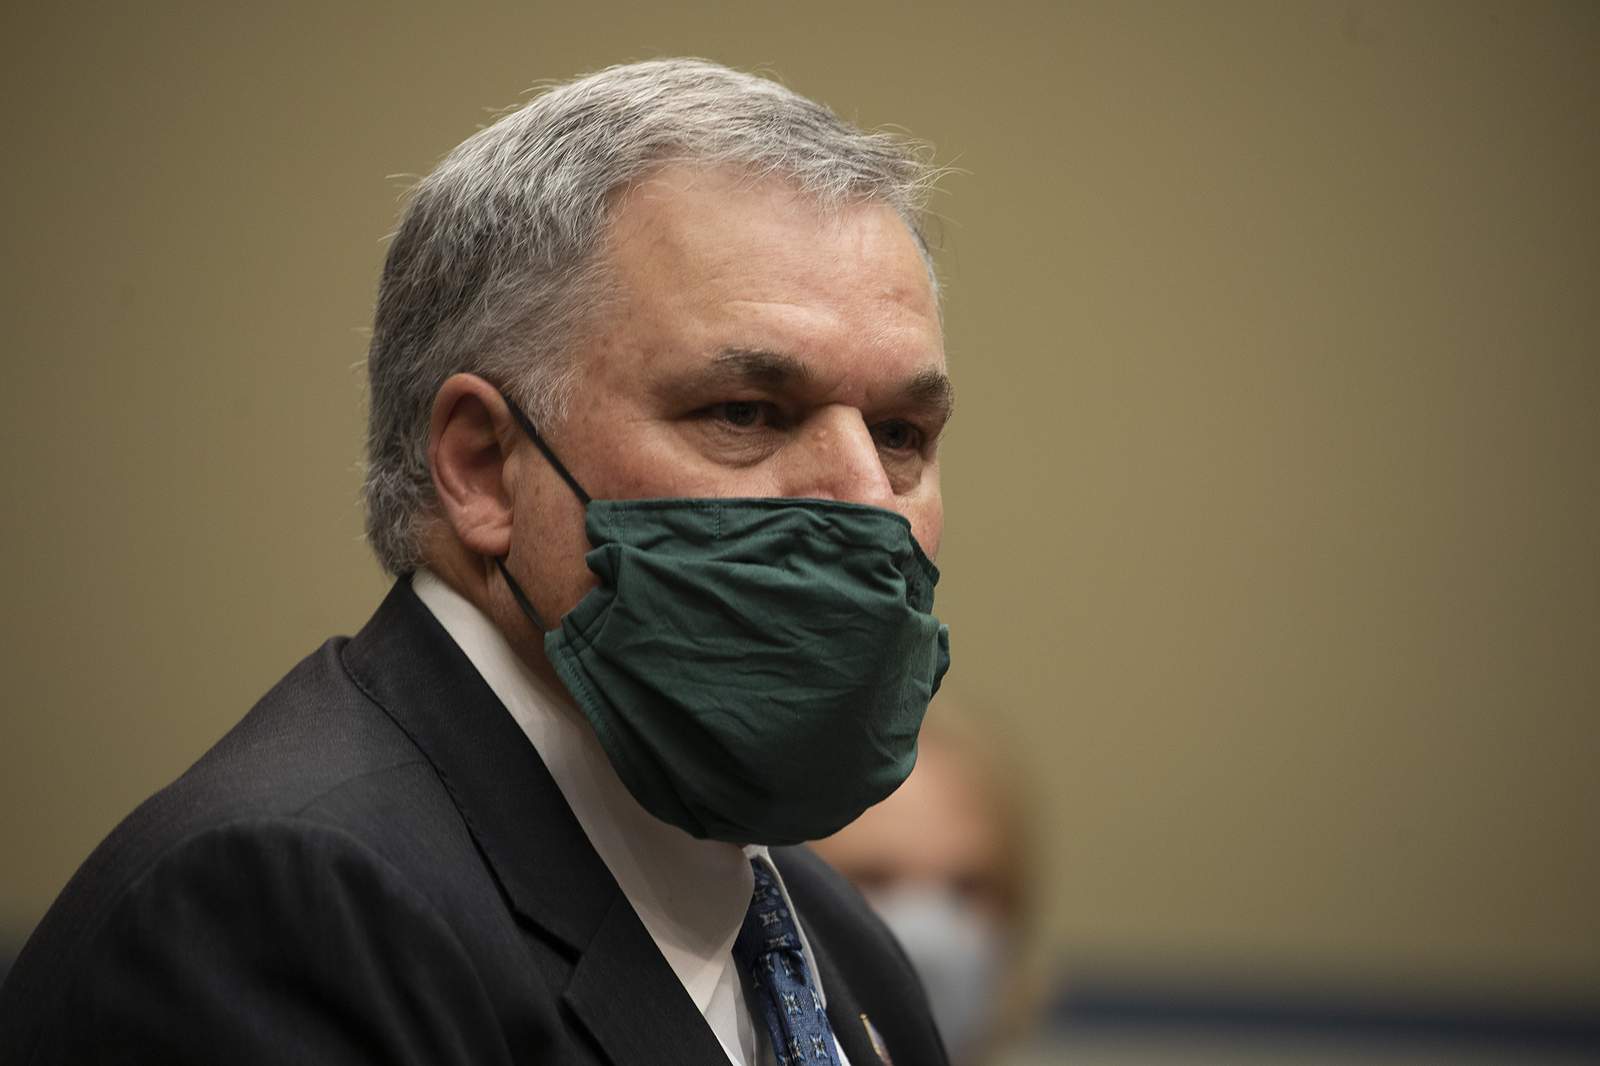 IRS chief: agency reaching out on pandemic relief payments